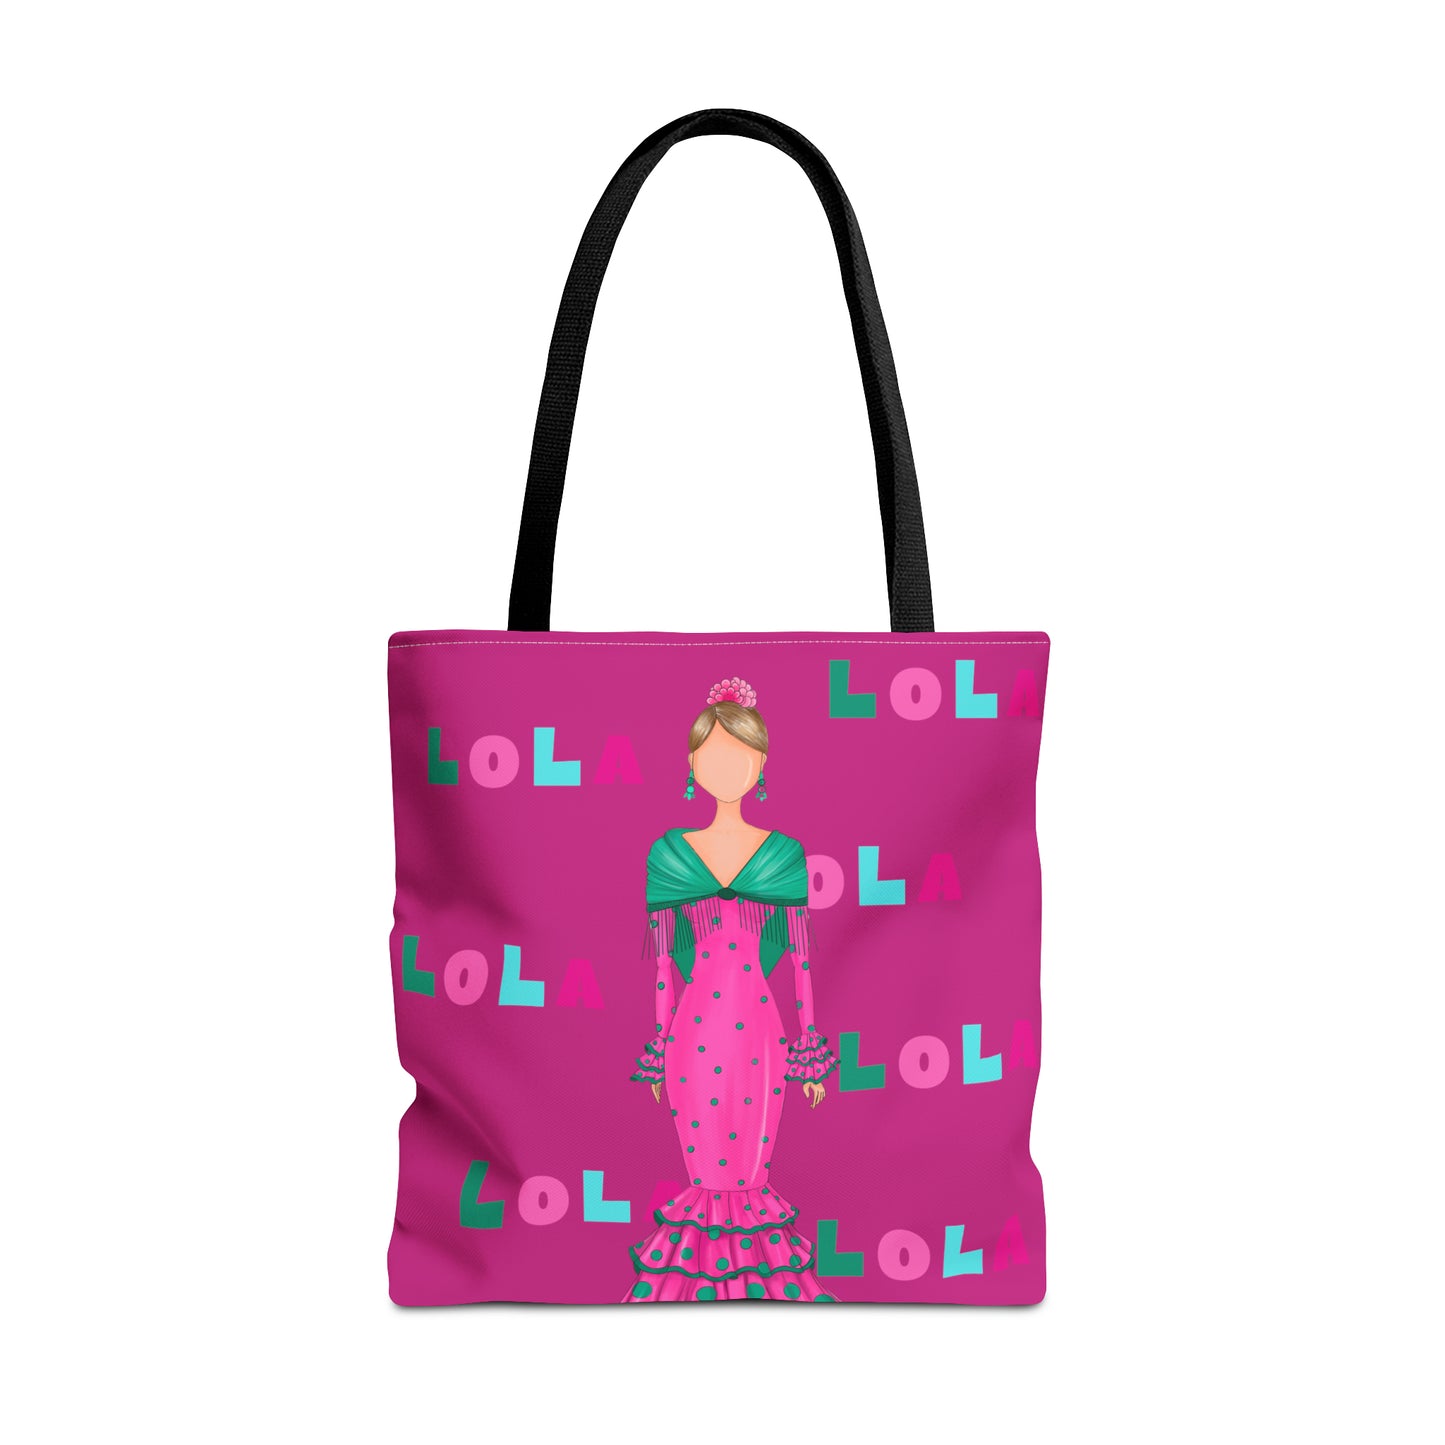 Flamenco lover Tote Bag, fabric tote bag with pink background your name in colours and our flamenco dancer Lola in a pink dress.